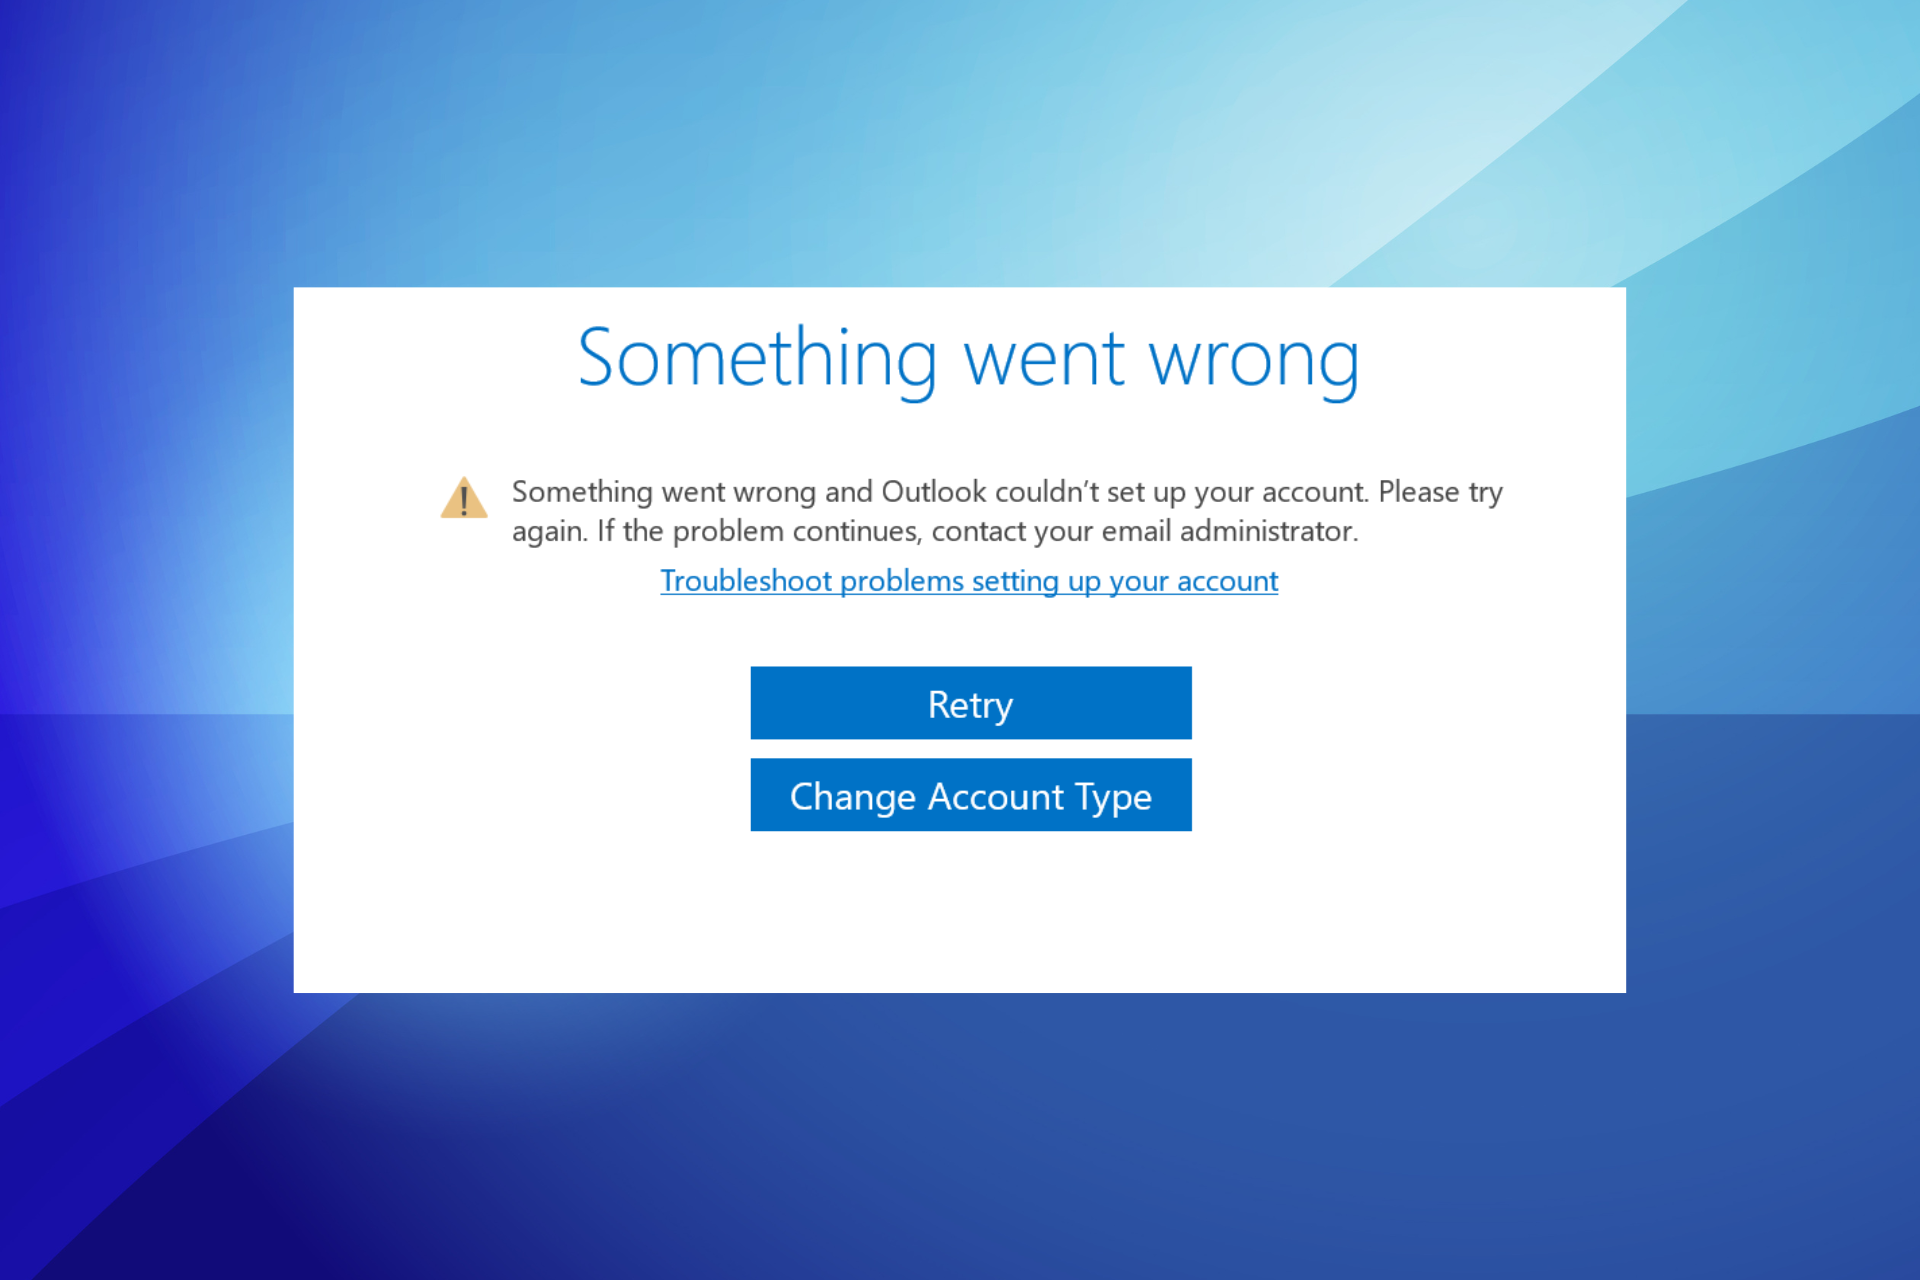 Fix something went wrong and outlook couldn't set up account error in Windows